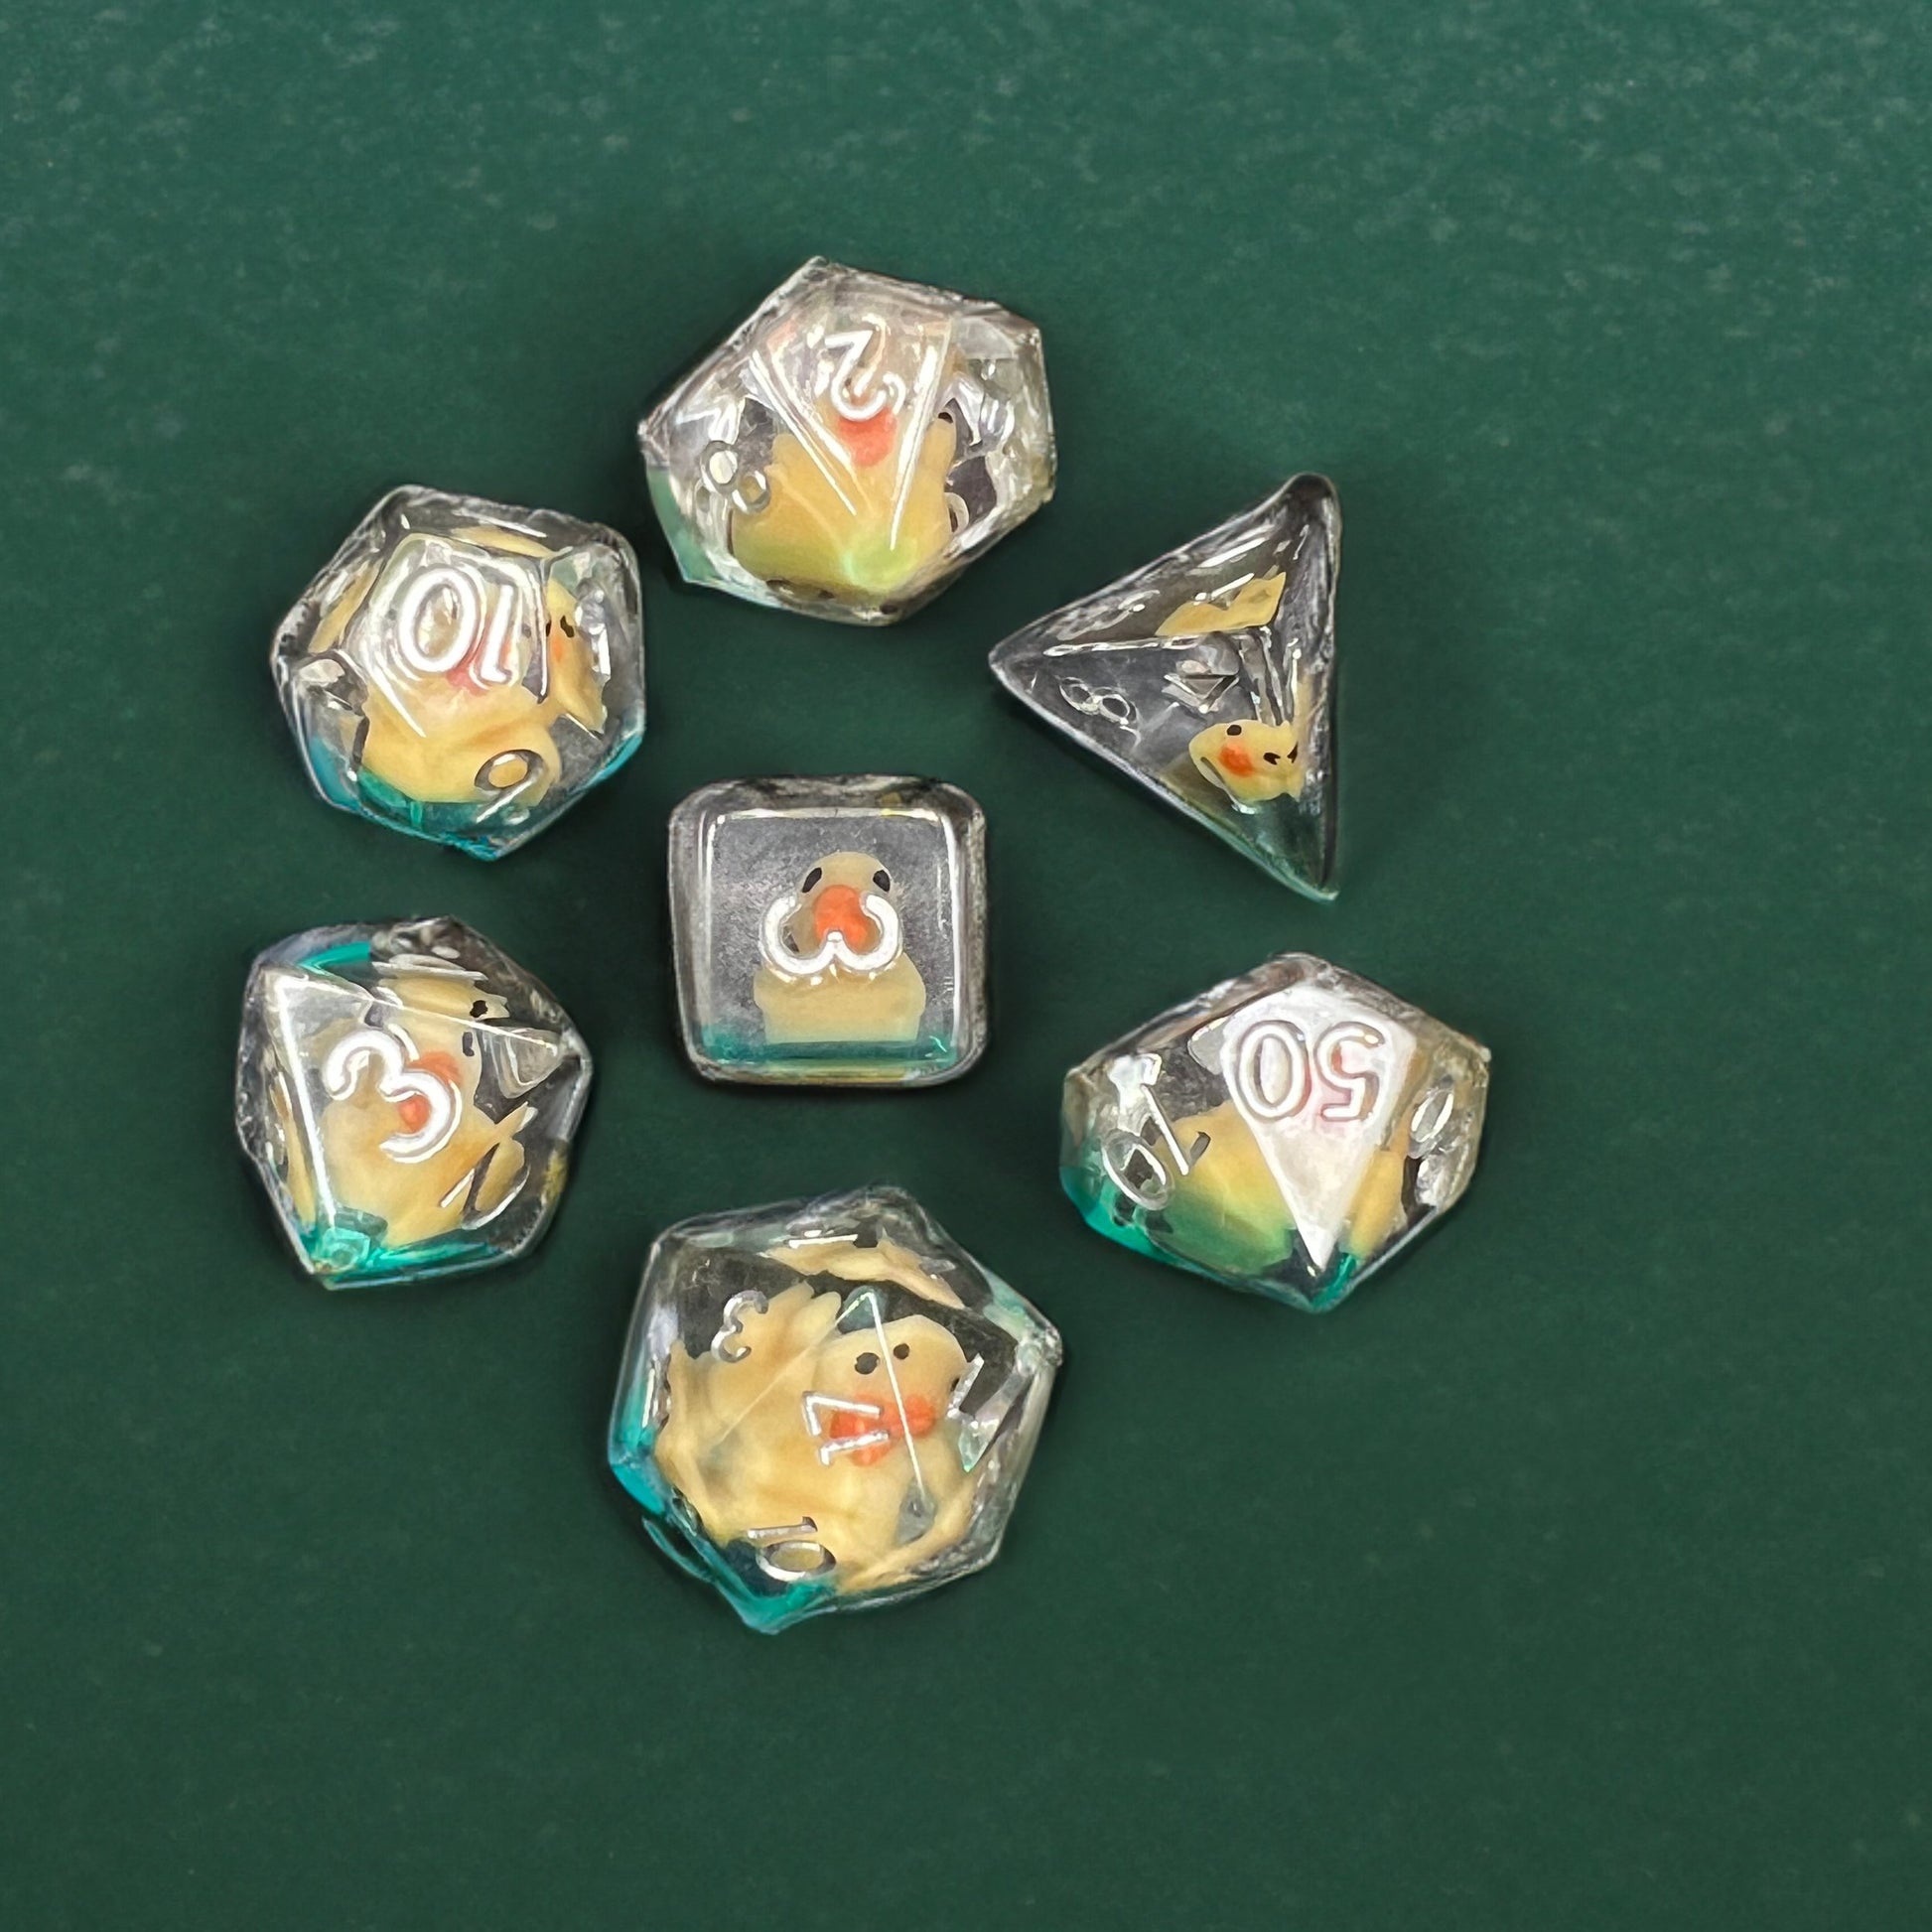 Rubber Ducky Dice Set for D&D Pathfinder RPG Yellow Duck - DCE36 - Merchants of Immersion